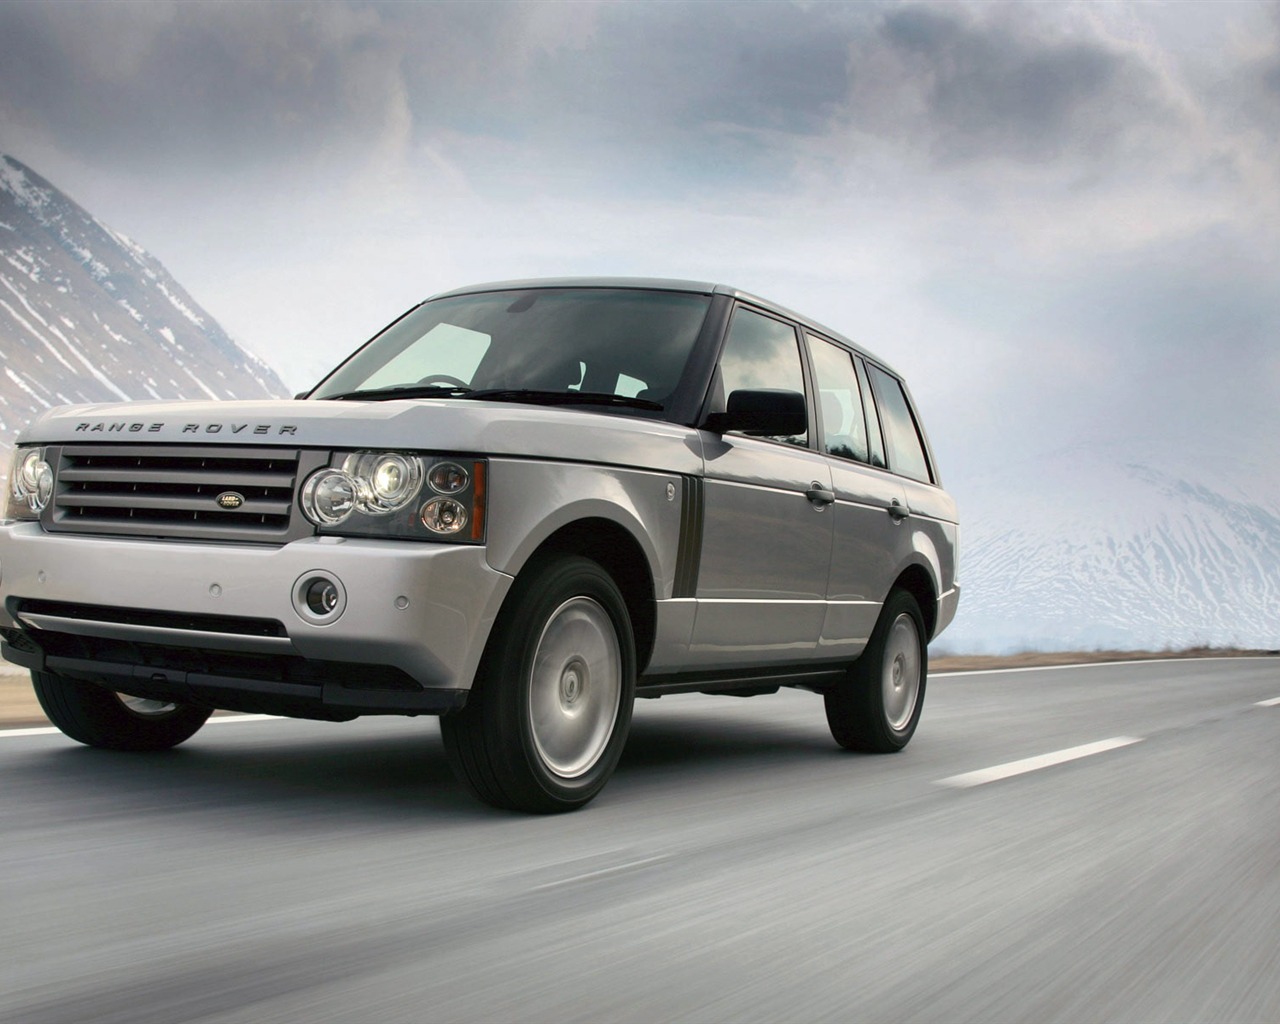 Land Rover Wallpapers Album #13 - 1280x1024